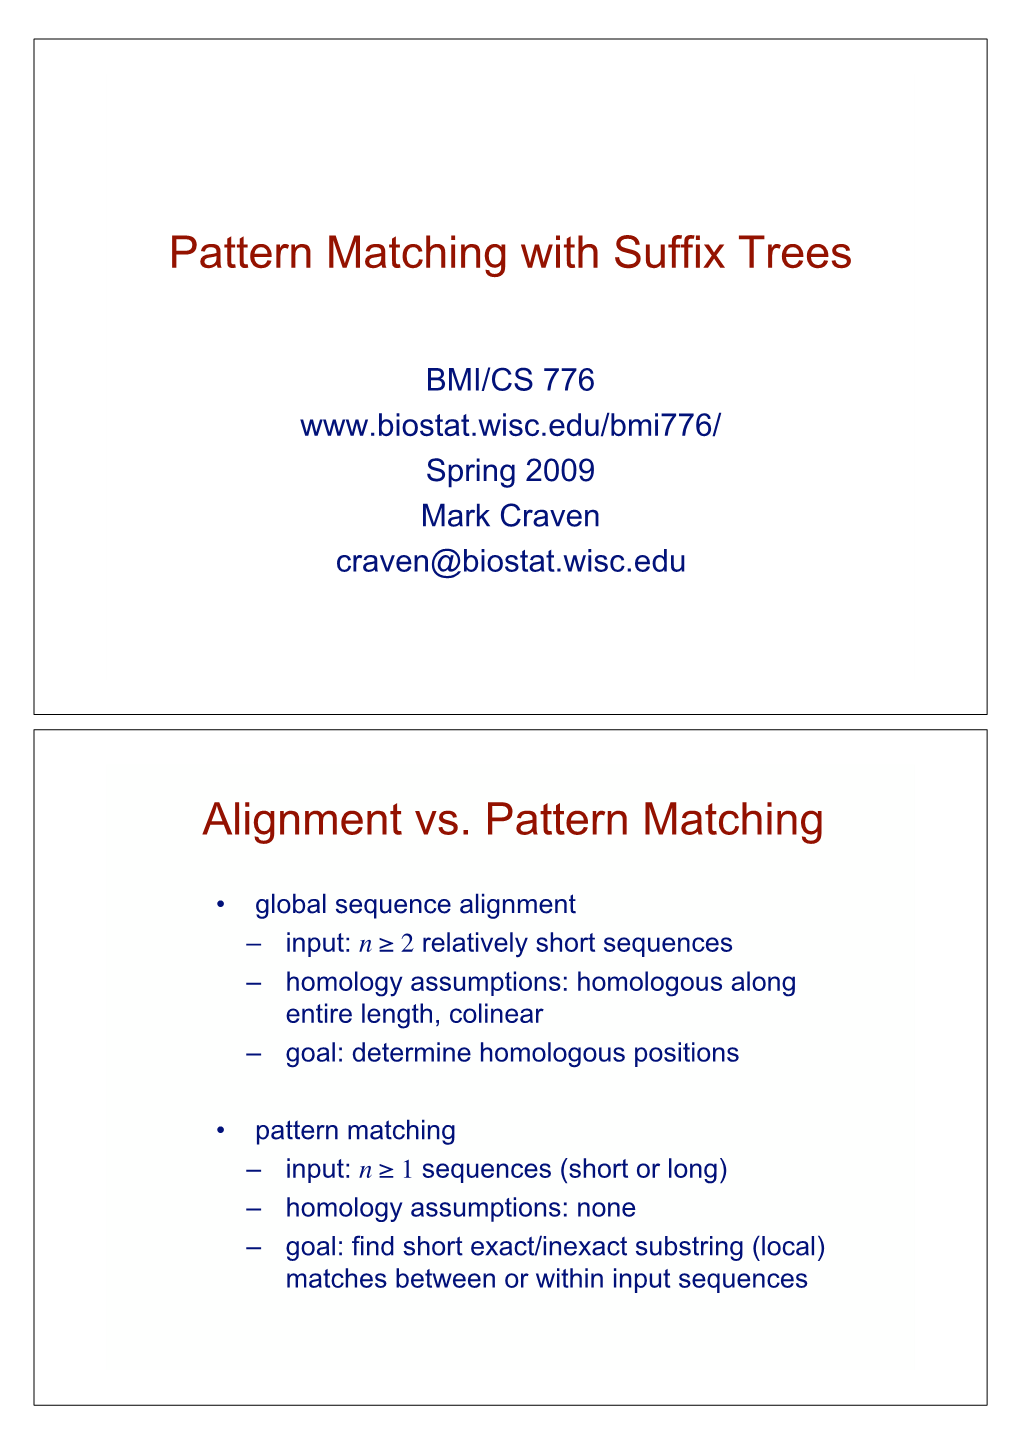 Pattern Matching with Suffix Trees Alignment Vs. Pattern Matching